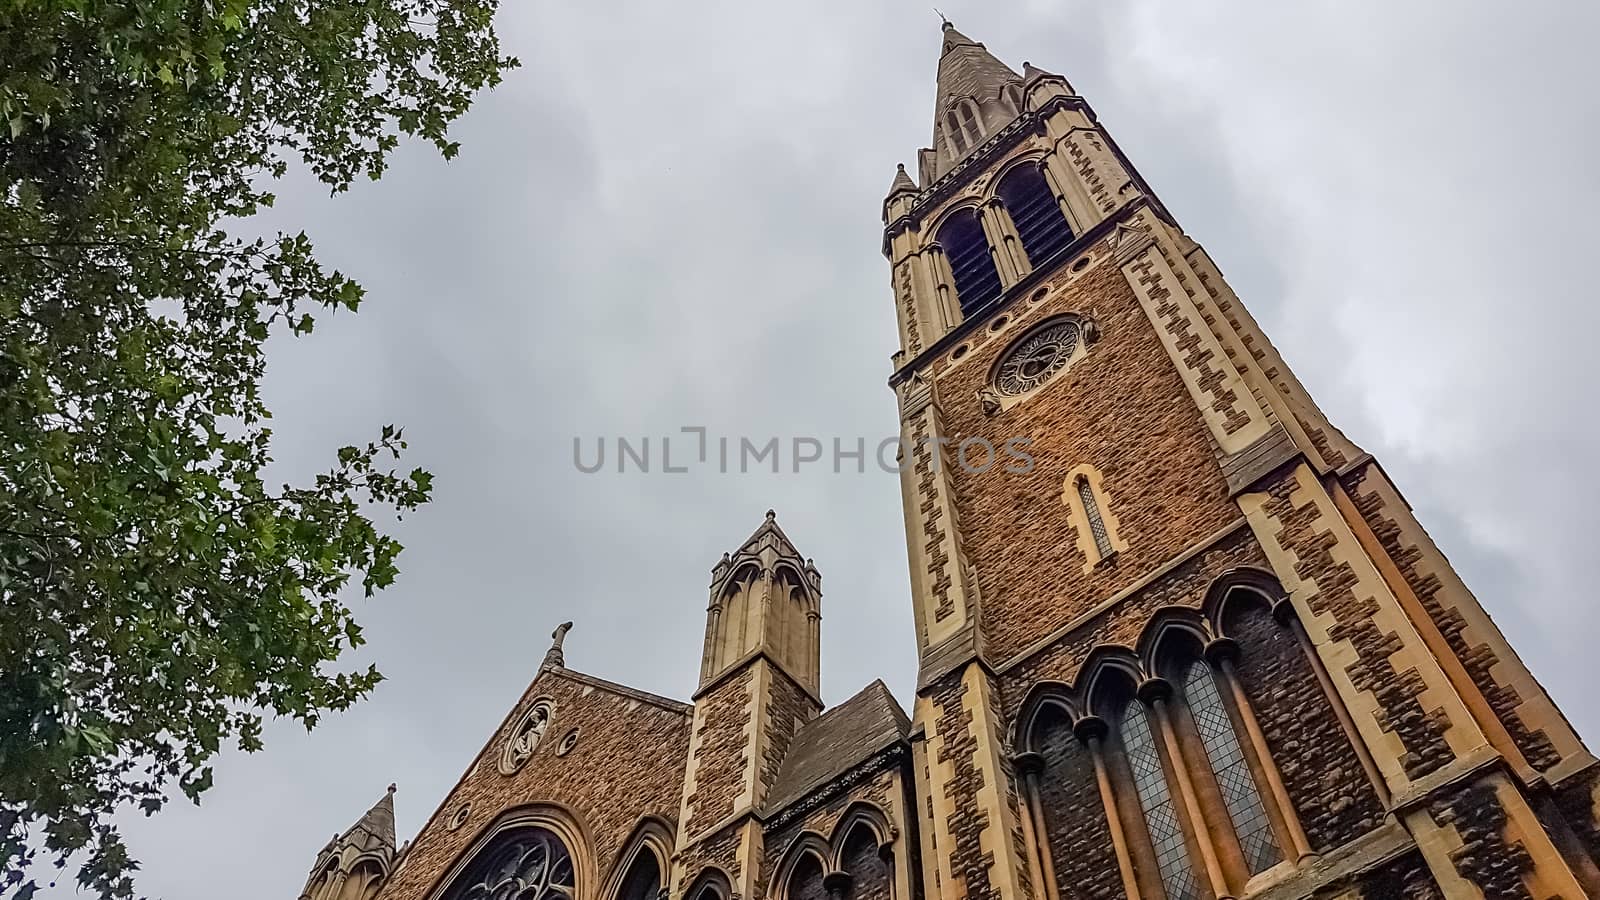 London, UK - July 8, 2020: Low angle shot of St. Matthew's church. Cloudy sky as a background.